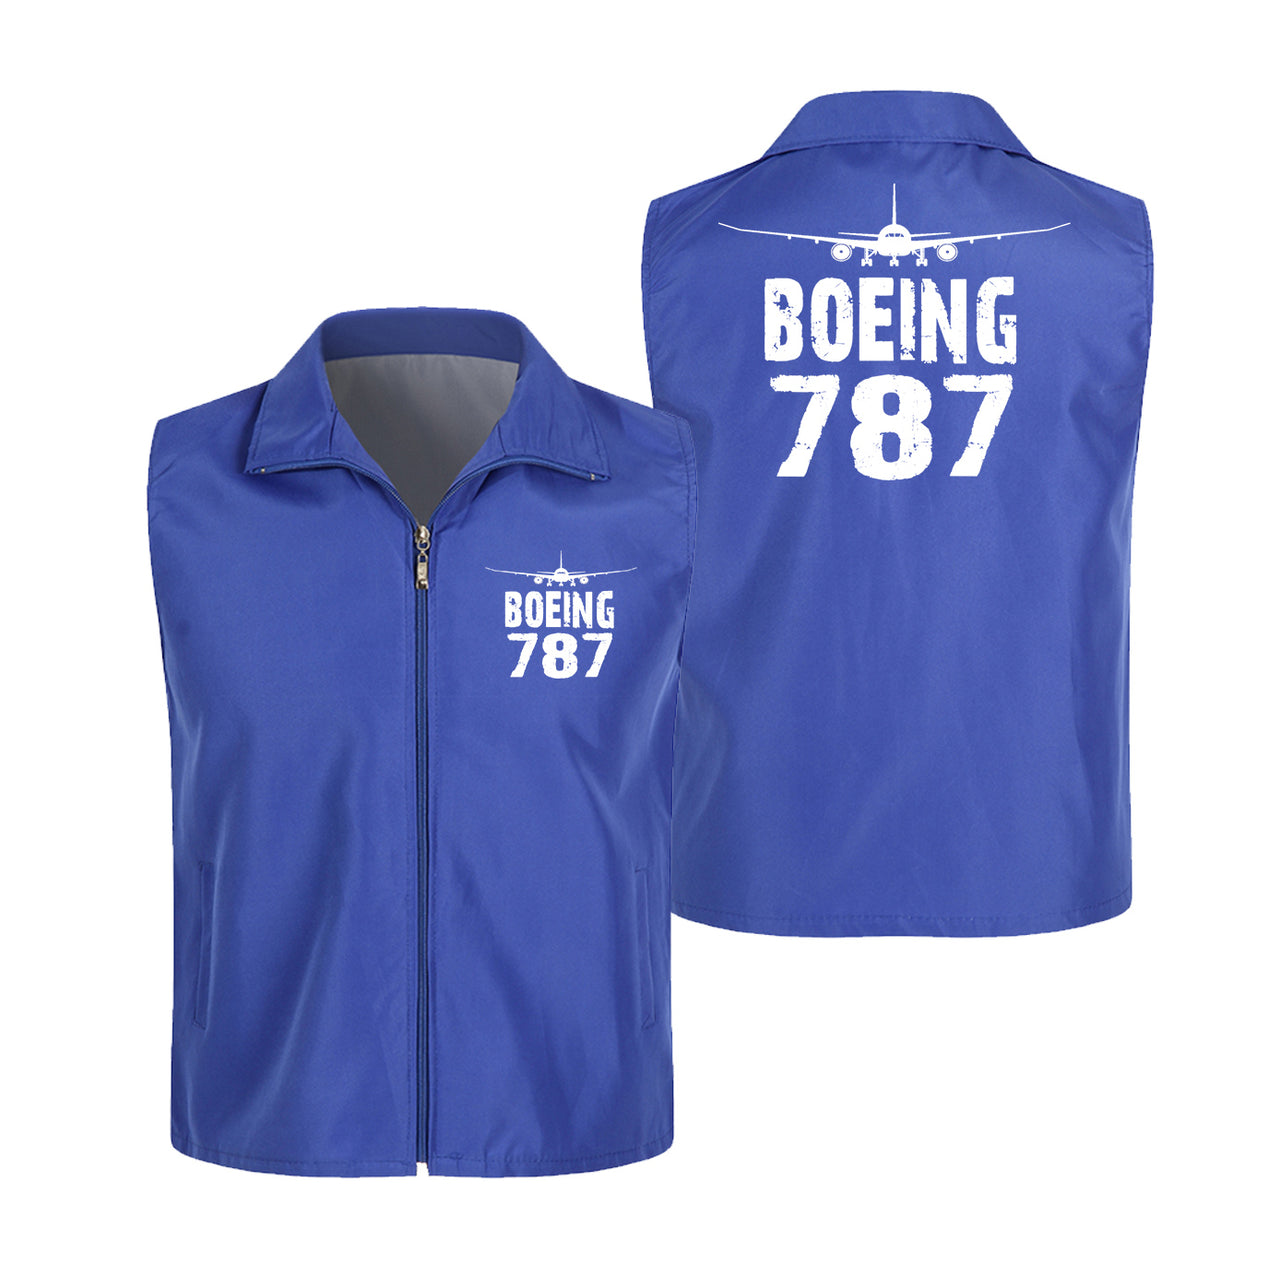 Boeing 787 & Plane Designed Thin Style Vests